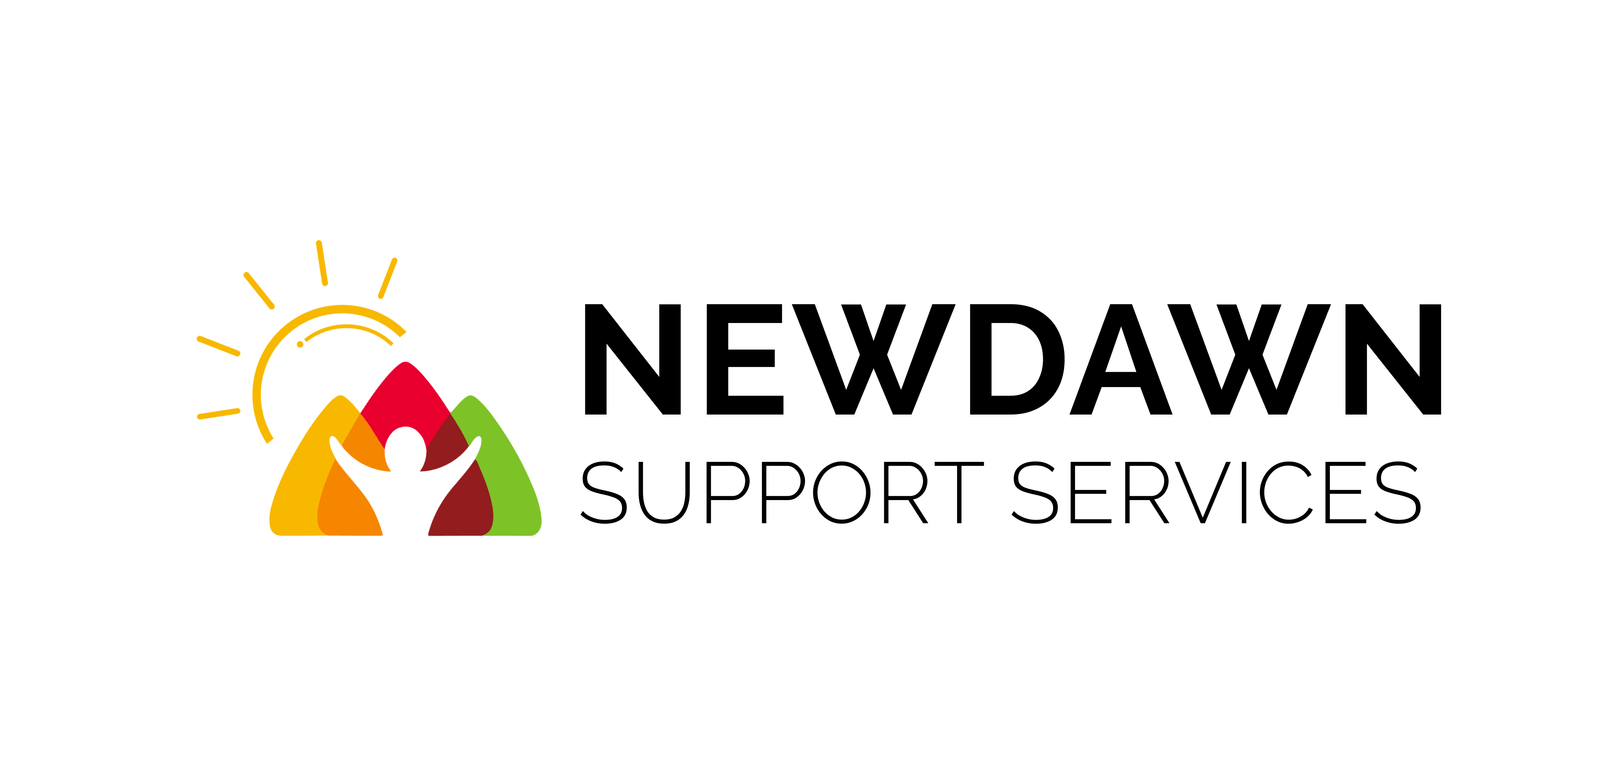 Newdawn support services logo